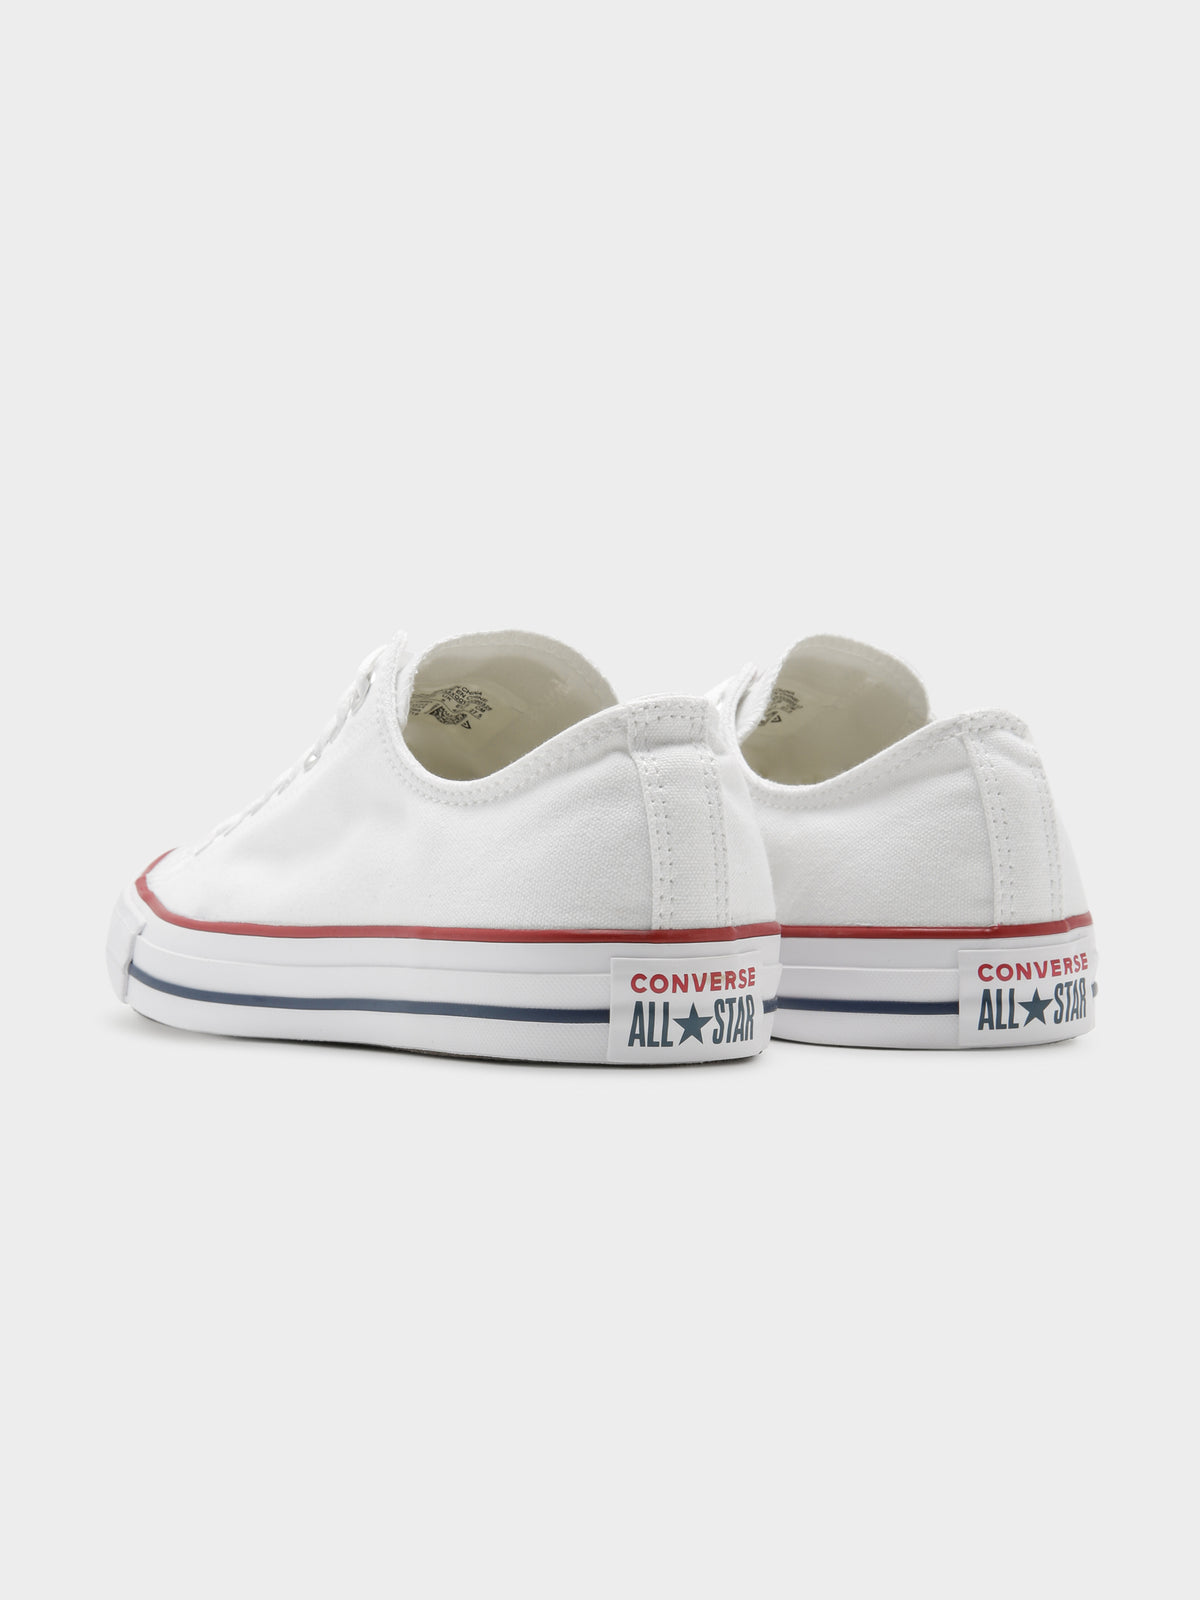 Unisex Chuck Taylor All Star Classic Low-Top Sneakers in White